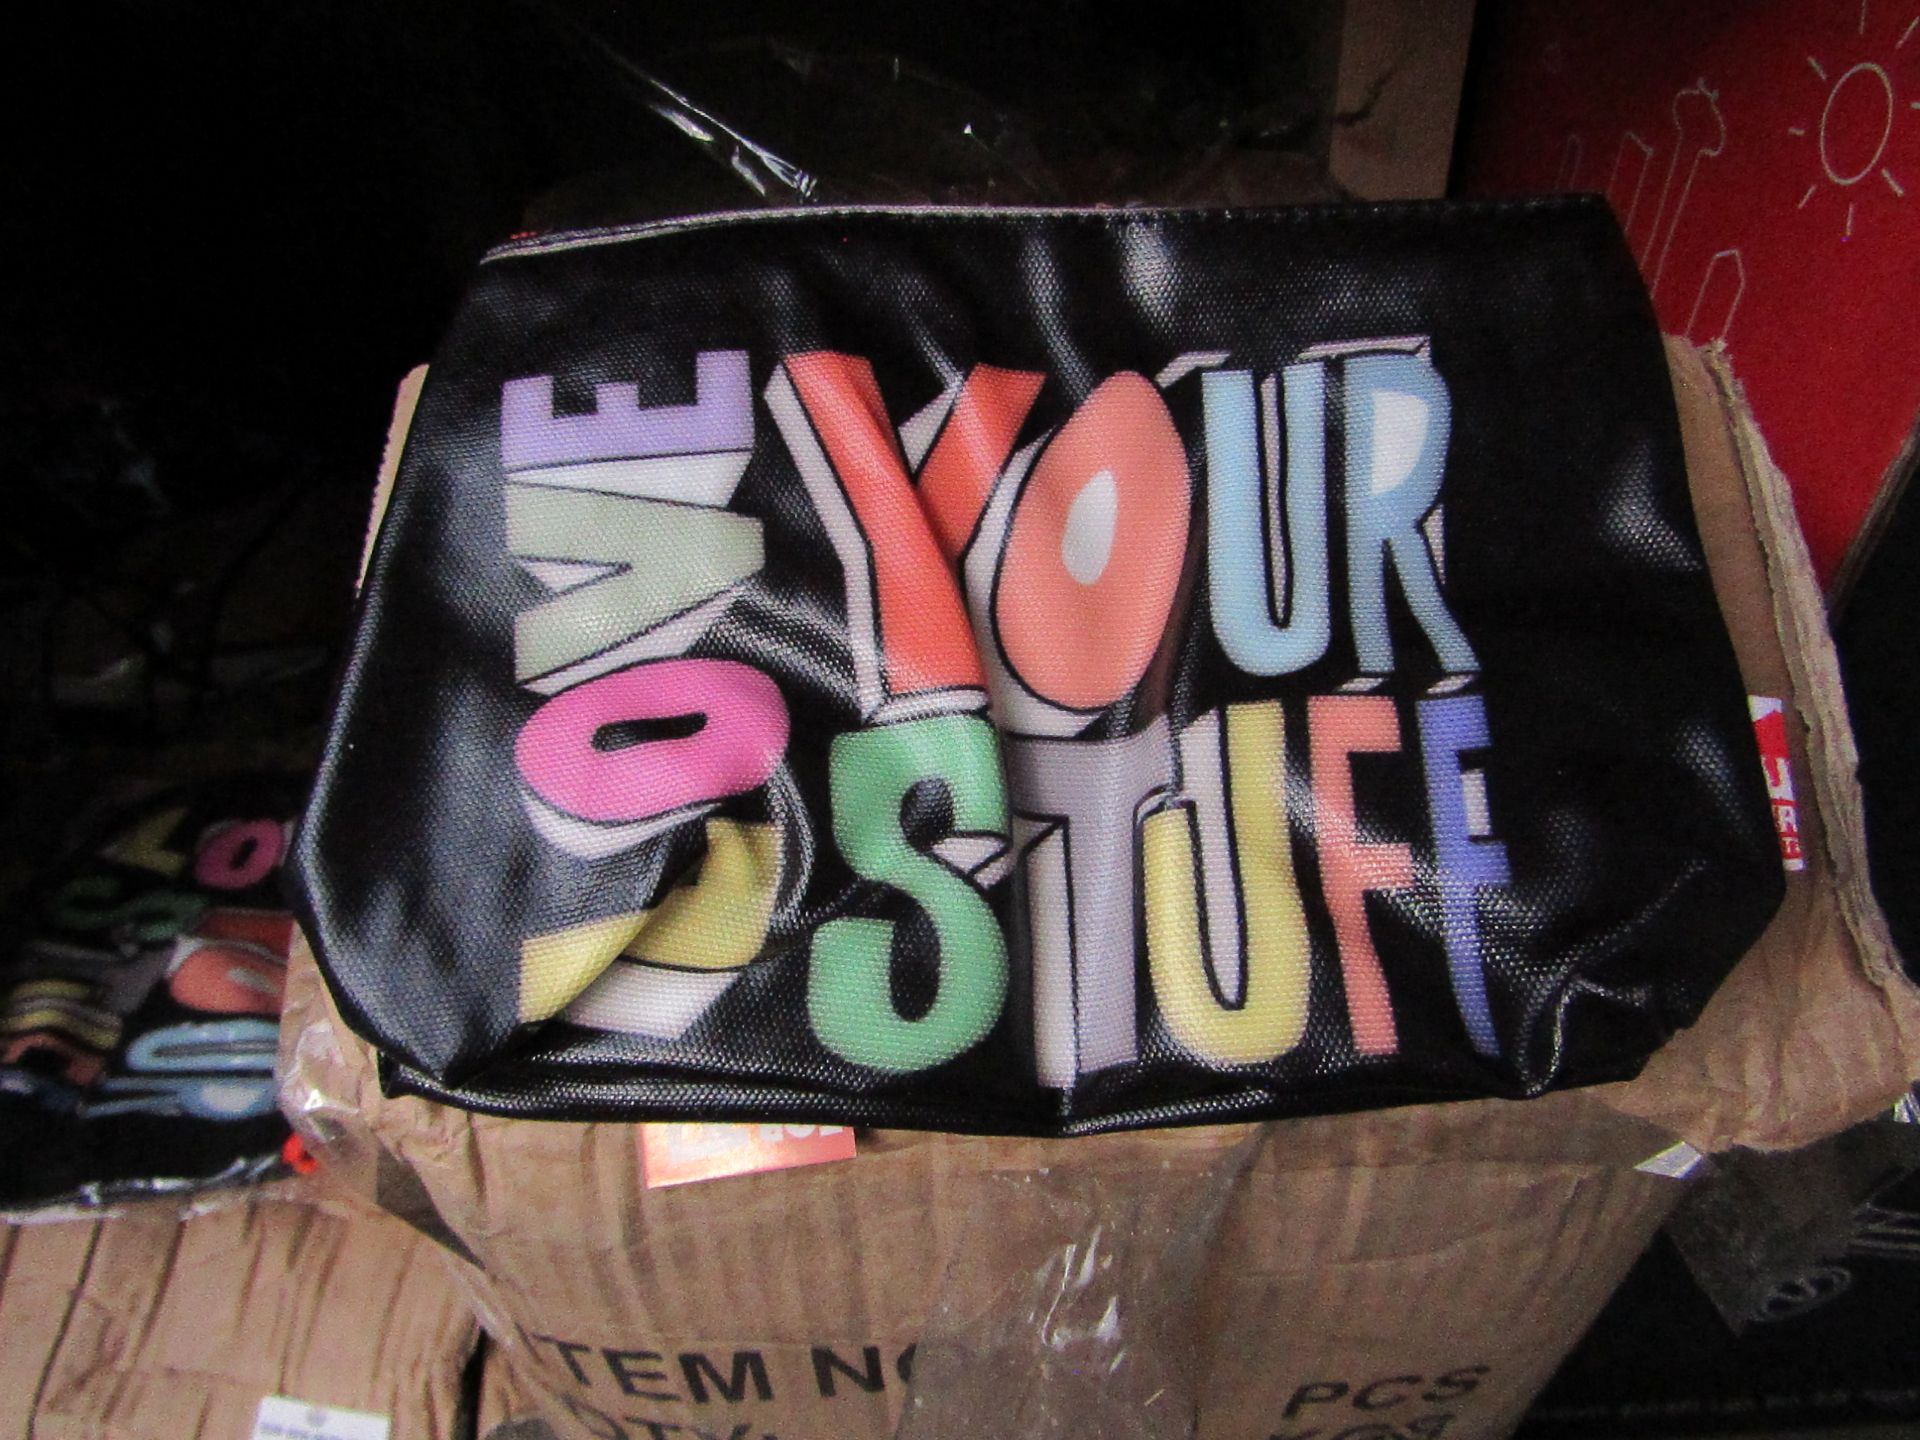 1x Box Containing 100 Units Being : Urban Outfitters - Love Your Stuff Cosmetics Bags - All Unused &